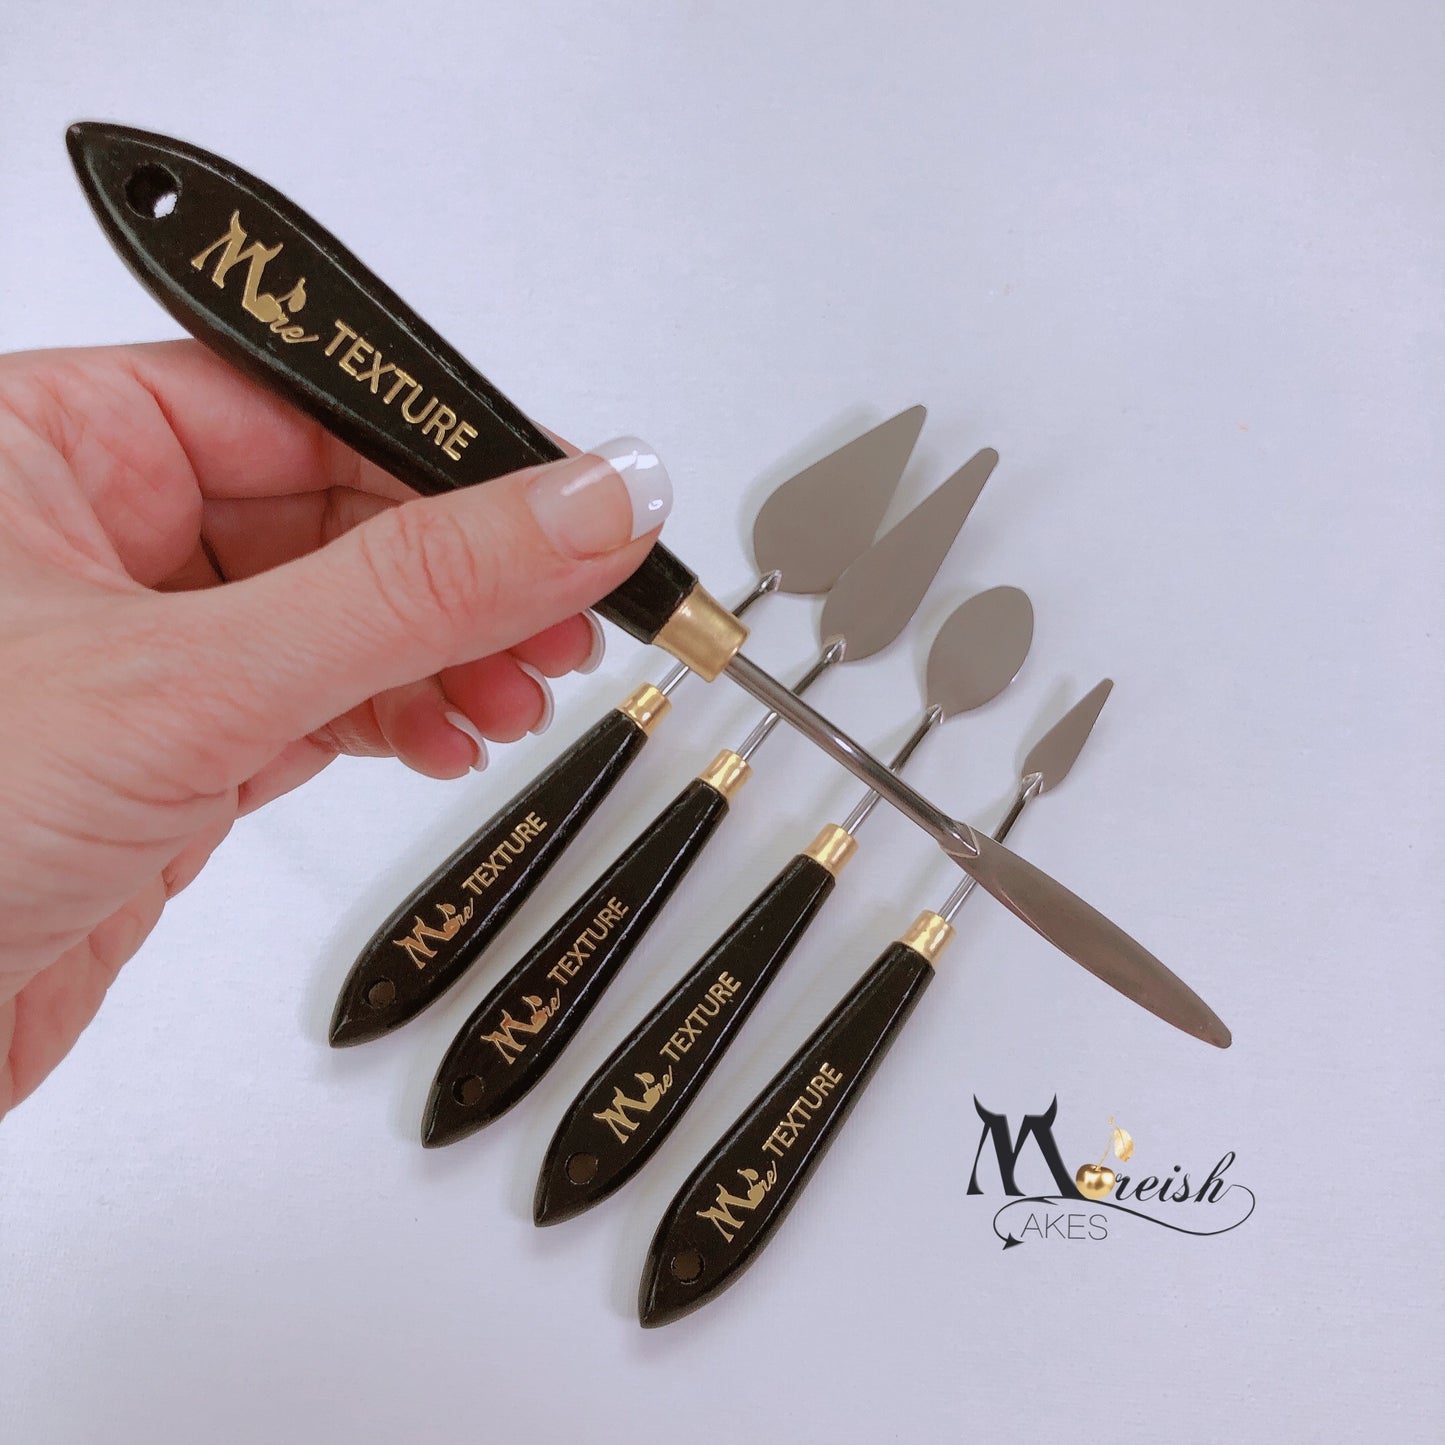 The Super Model - More Texture Individual Palette Knives (From the Custom 5 Piece Set)